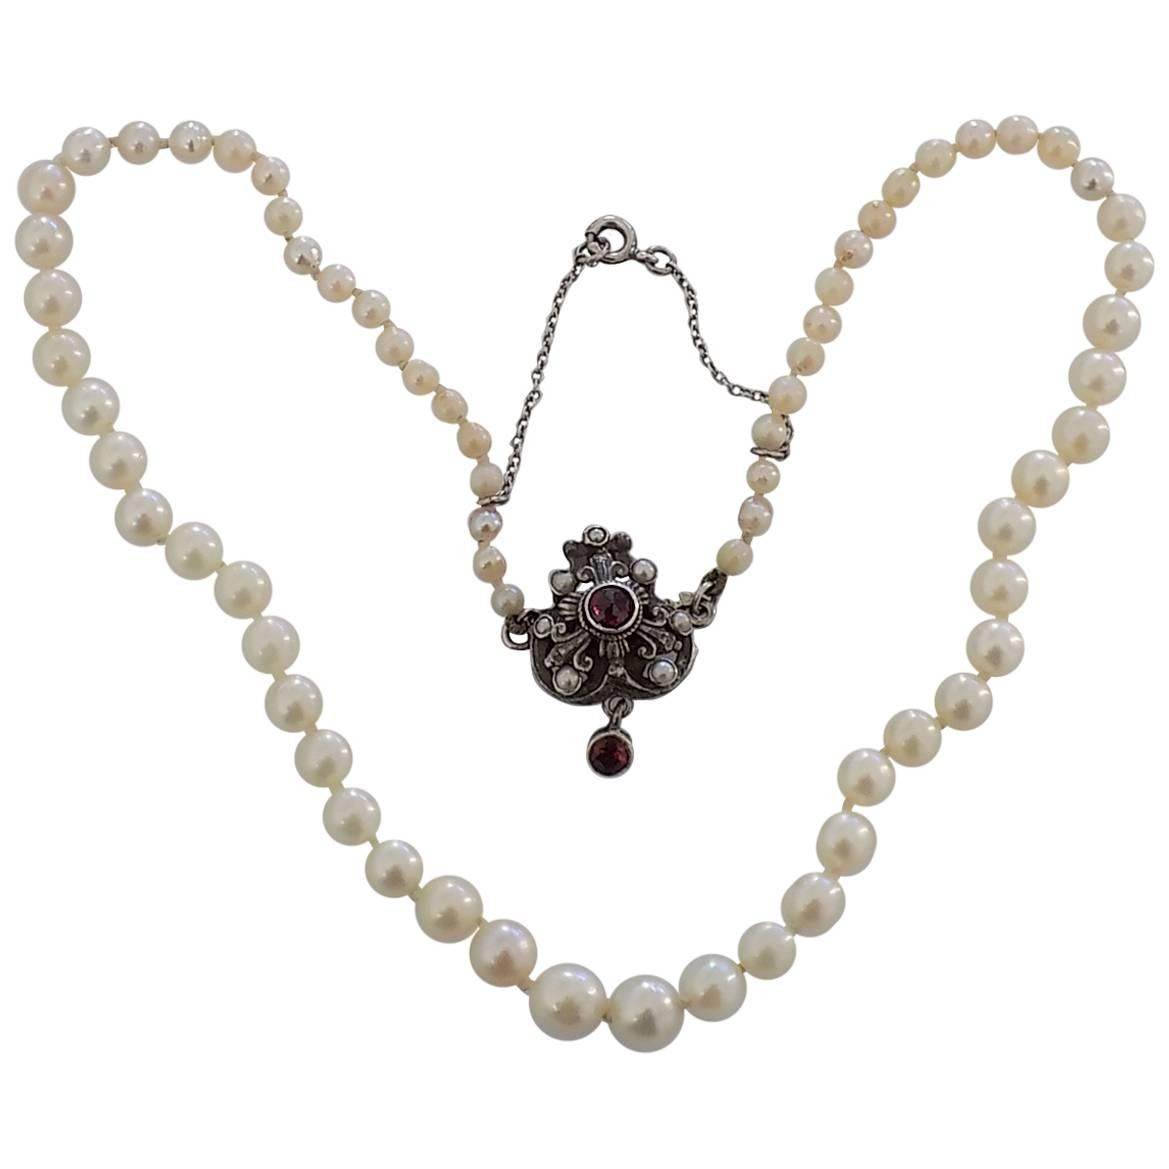 Antique Silver Garnet and Pearl chocker necklace